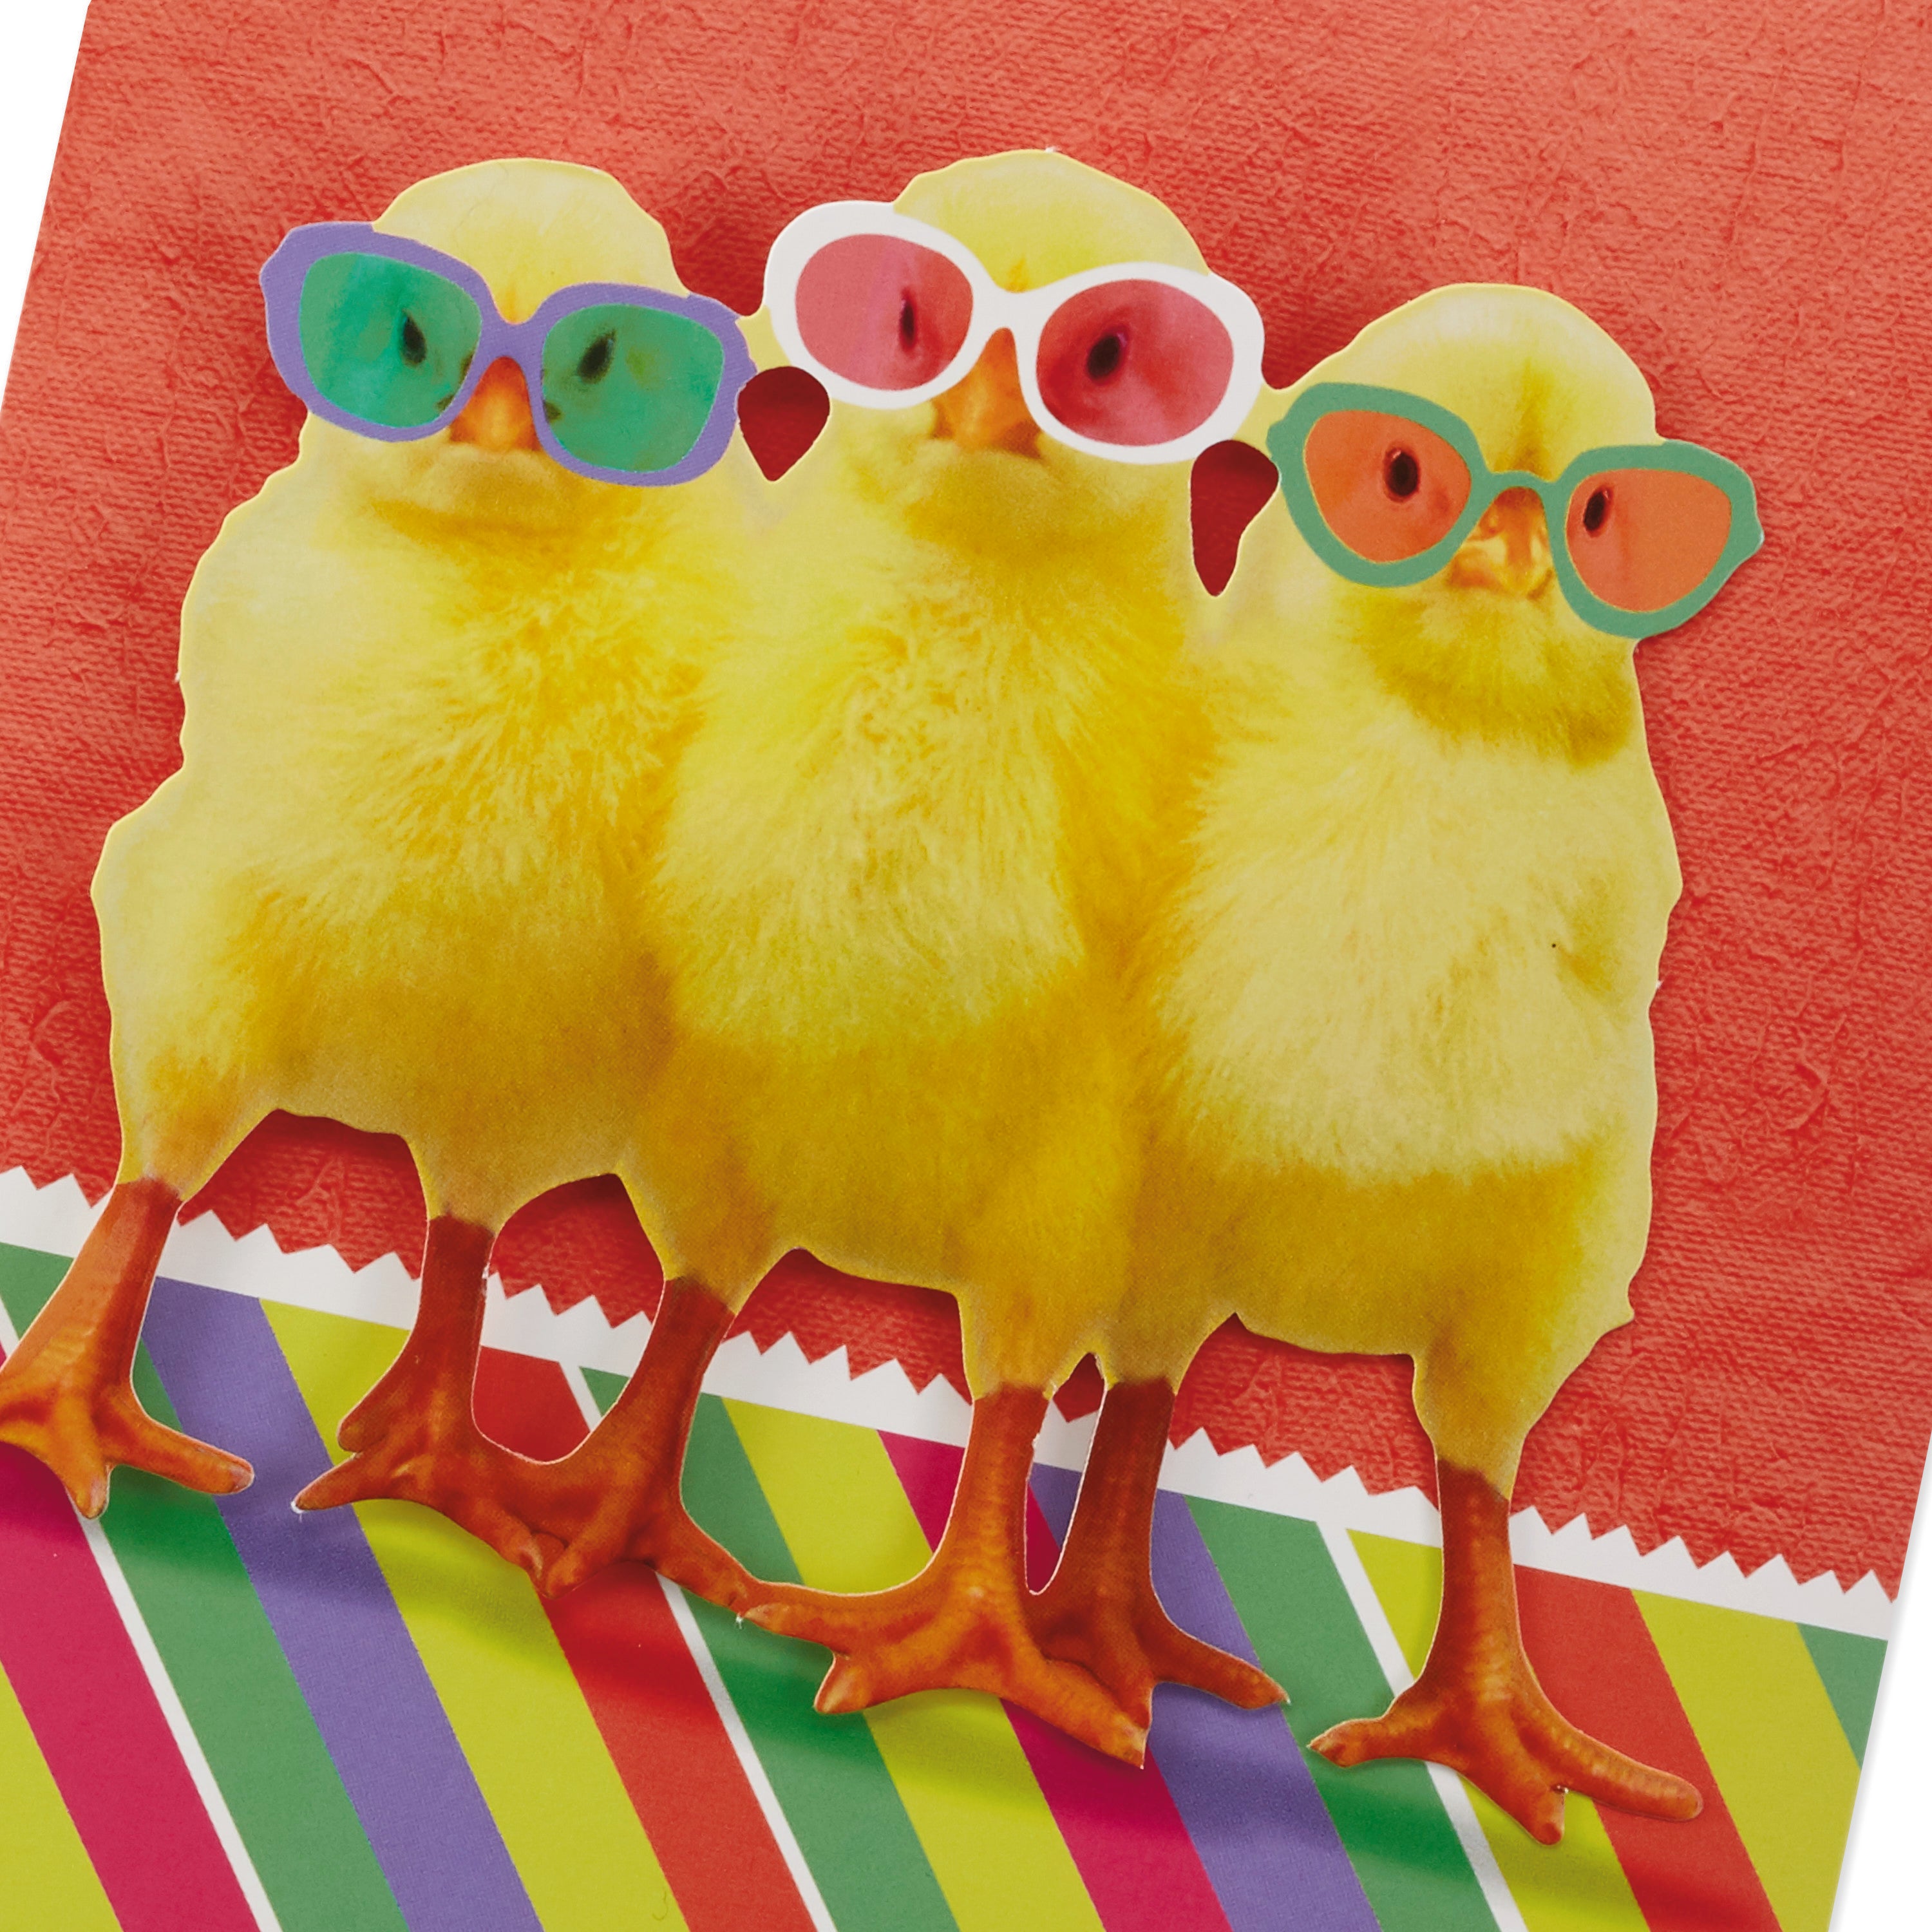 Hallmark Funny Musical Easter Card for Kids, Chicks in Sunglasses (Plays The Chicken Dance)